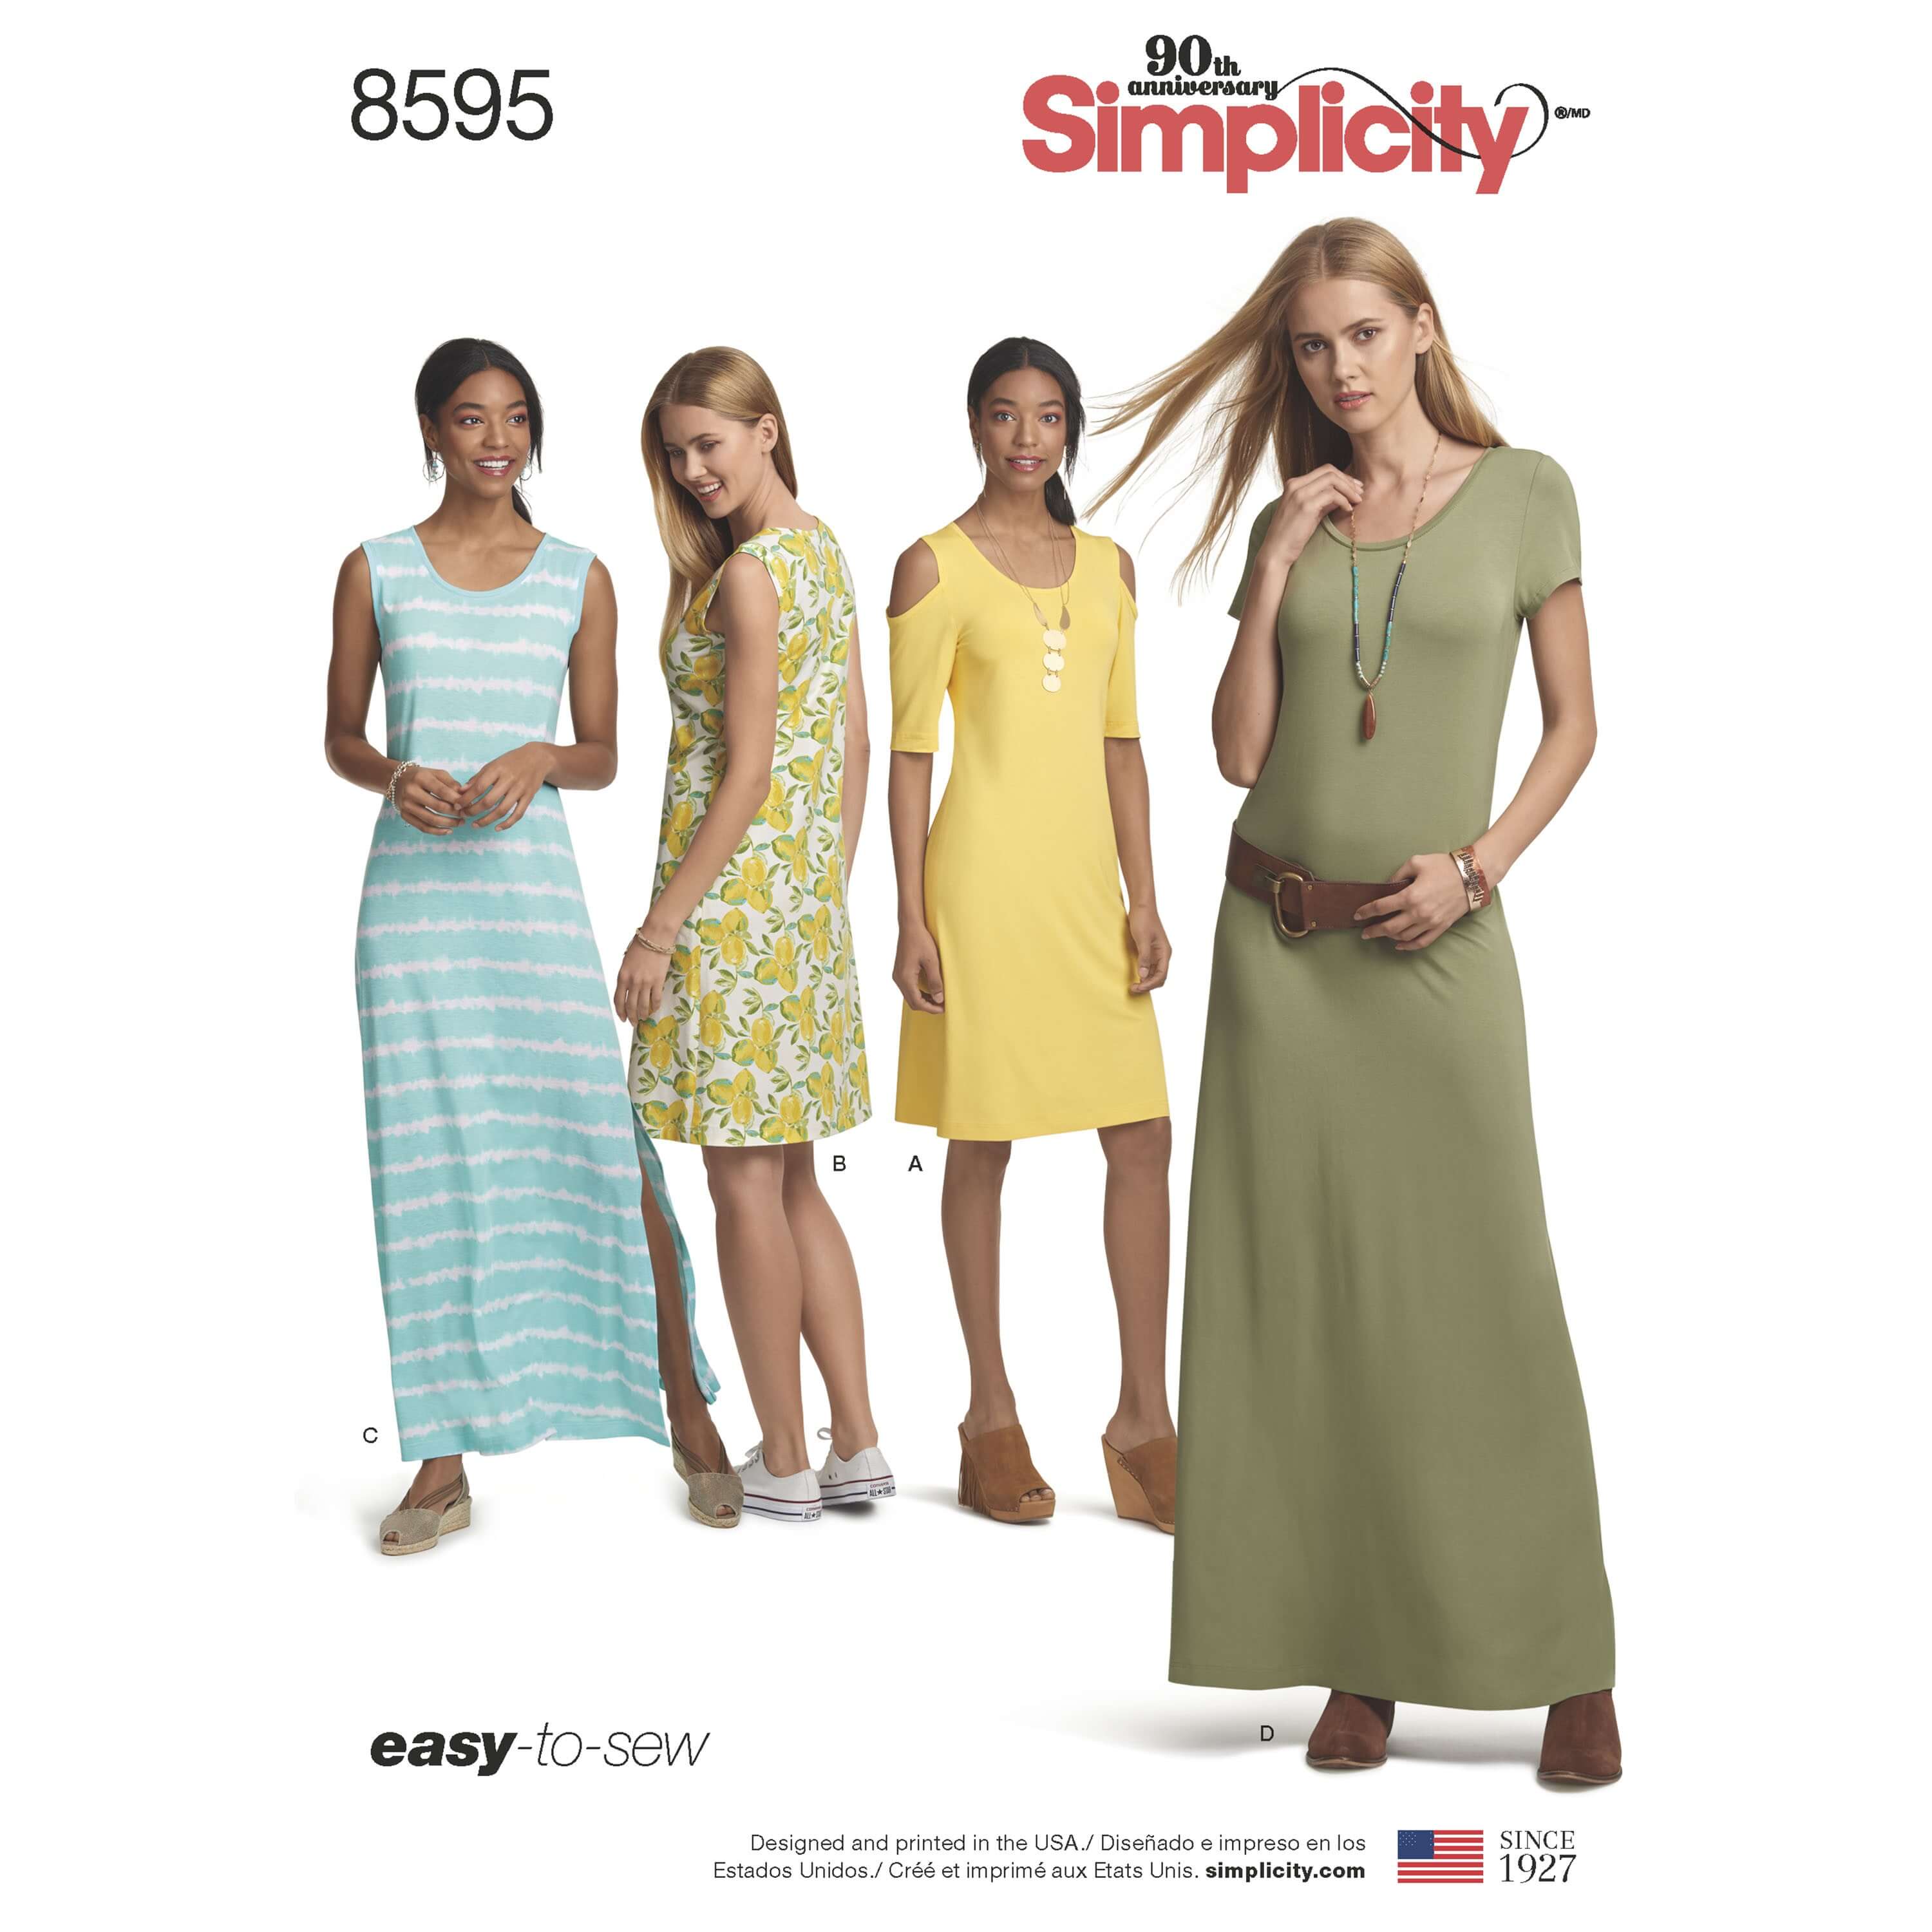 Simplicity Sewing Pattern 8595 Women's Knit Mini & Maxi Dresses Easy to Sew